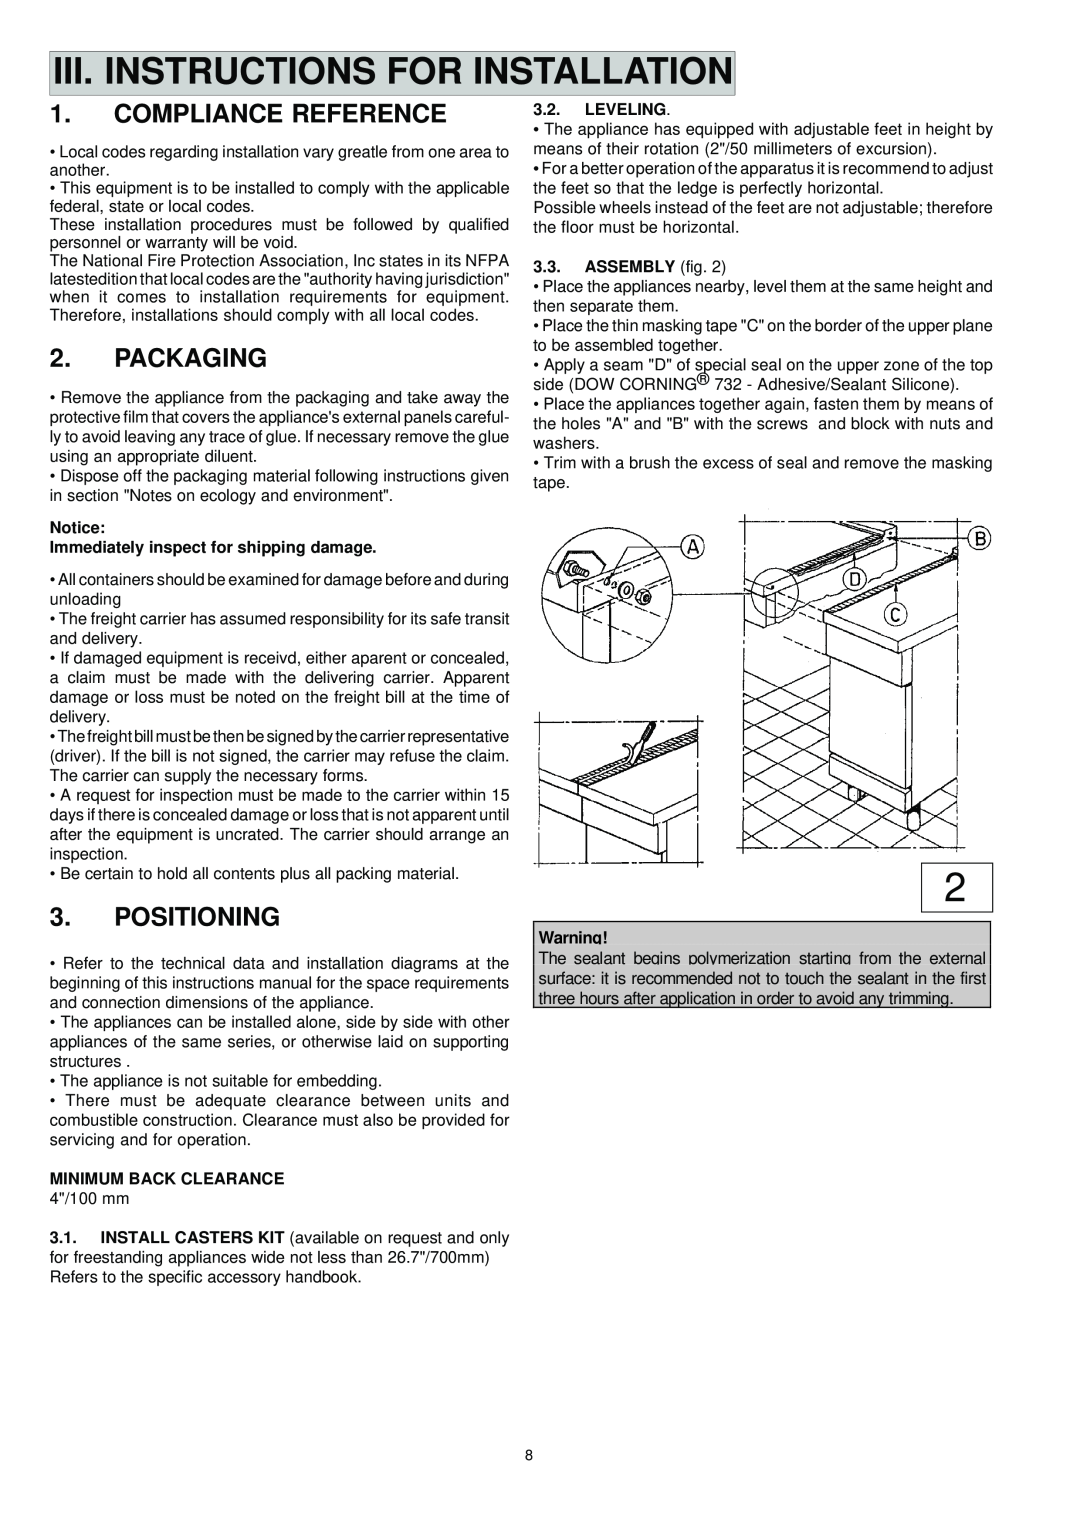 Electrolux PR 700 Iii. Instructions For Installation, Compliance Reference, Packaging, Positioning, Leveling, ASSEMBLY fig 